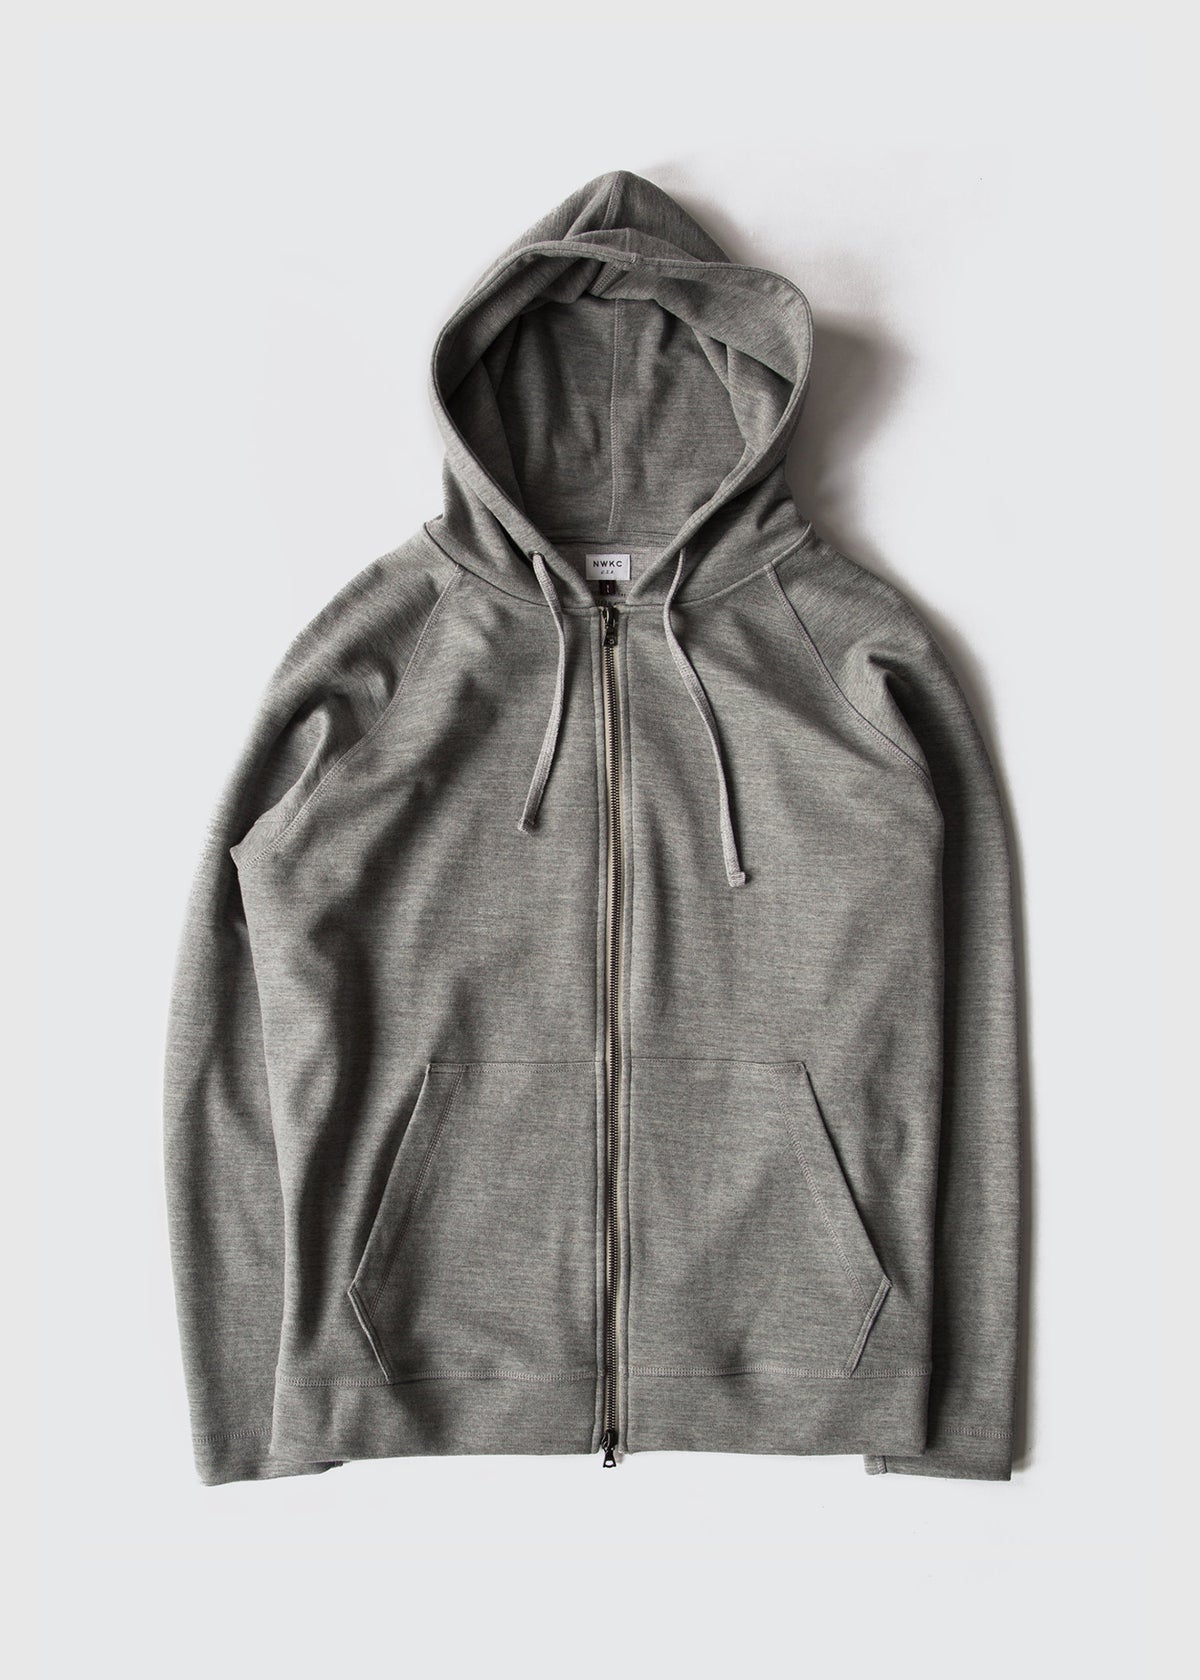 006 - HOODED ZIP - FEATHER GRAY - Wilson & Willy's - MPLS Neighbor Goods